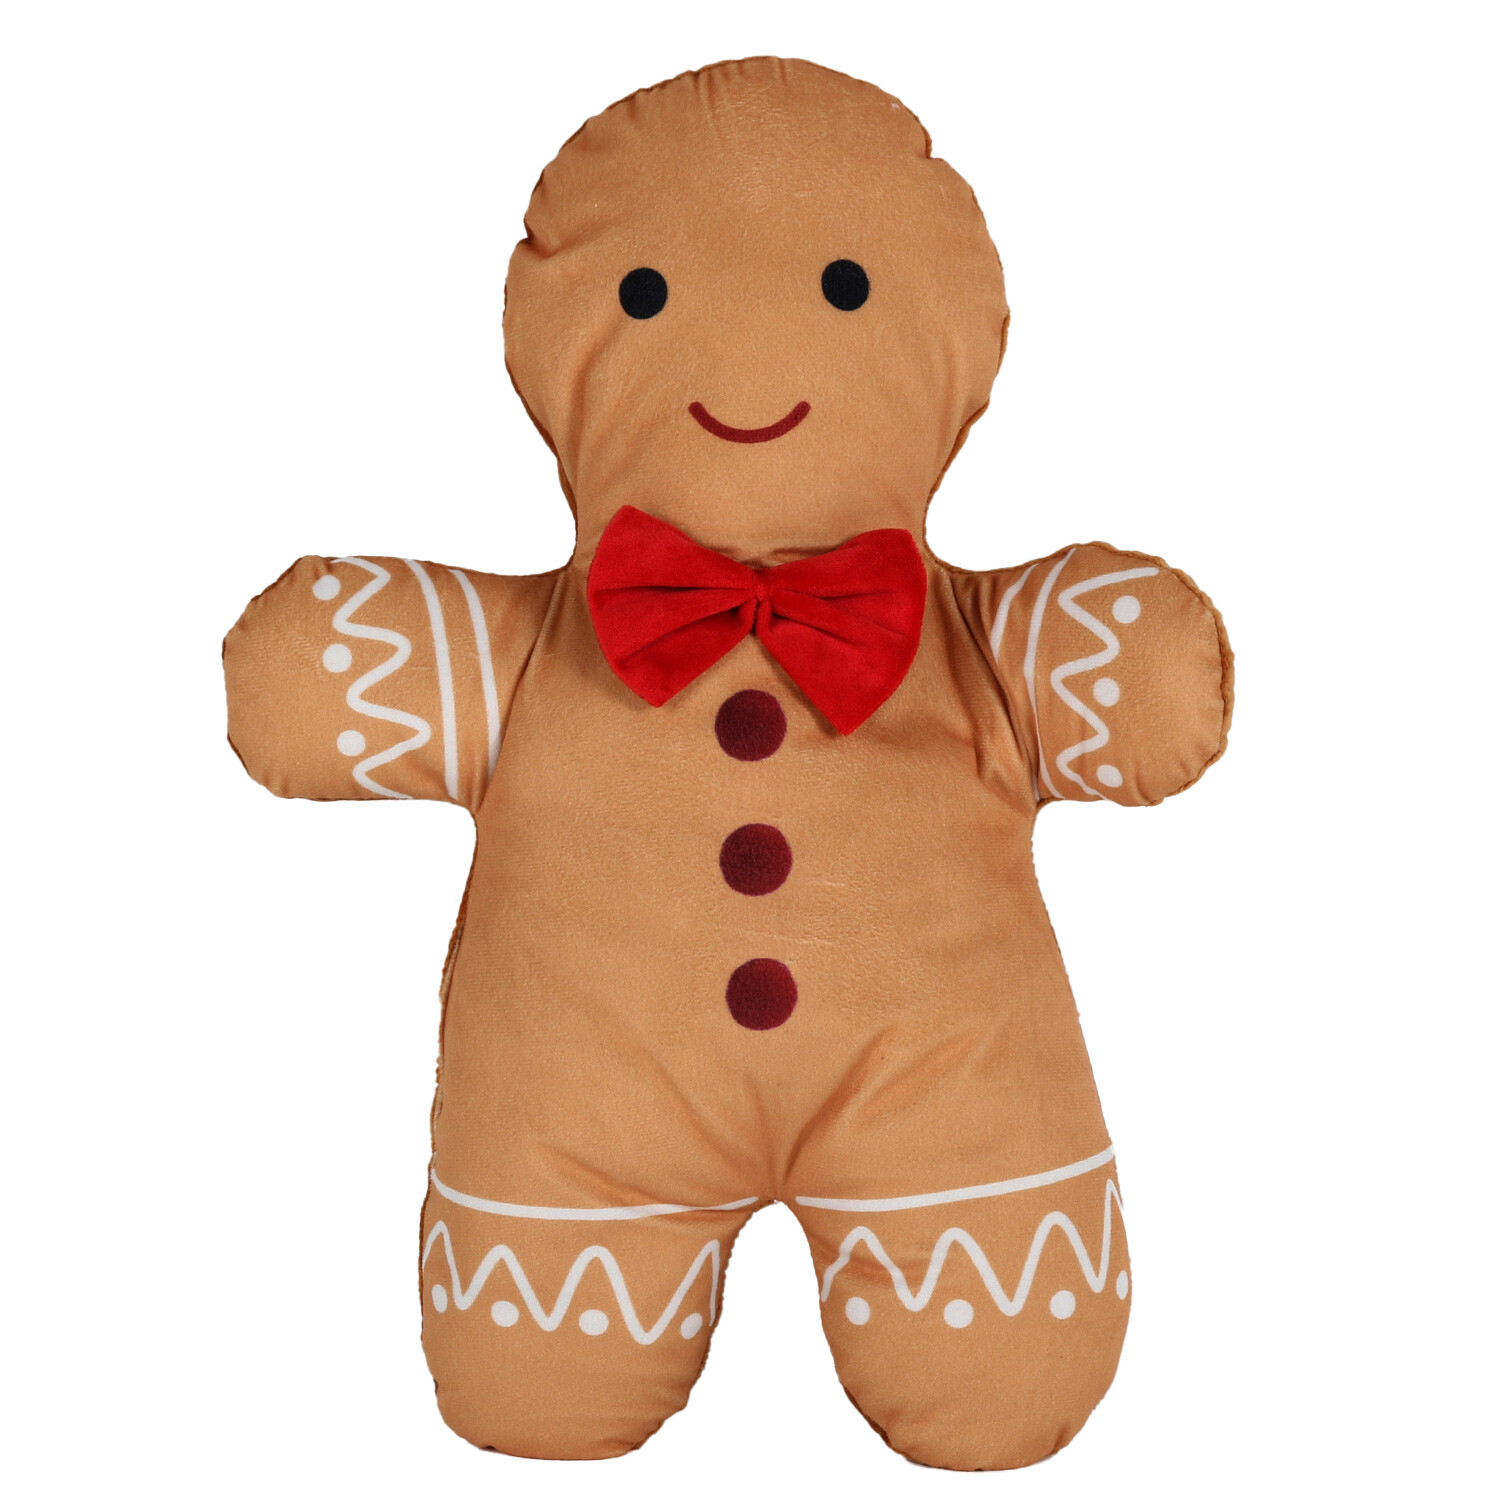 Gingerbread Shaped Cushion - Brown Image 1